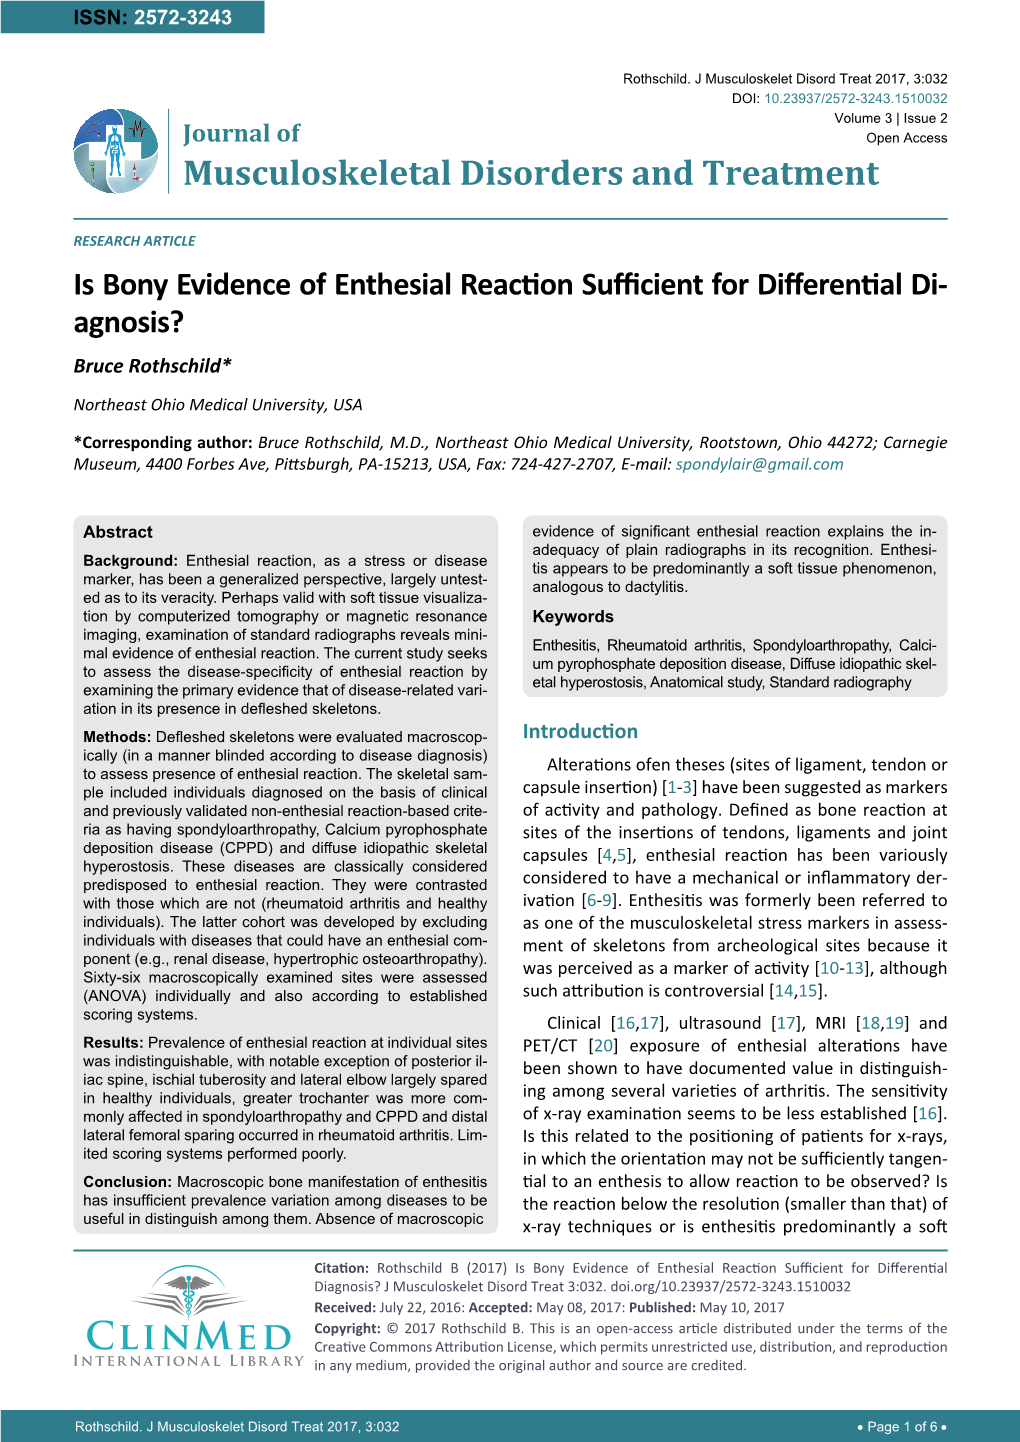 Is Bony Evidence of Enthesial Reaction Sufficient for Differential Di- Agnosis? Bruce Rothschild*